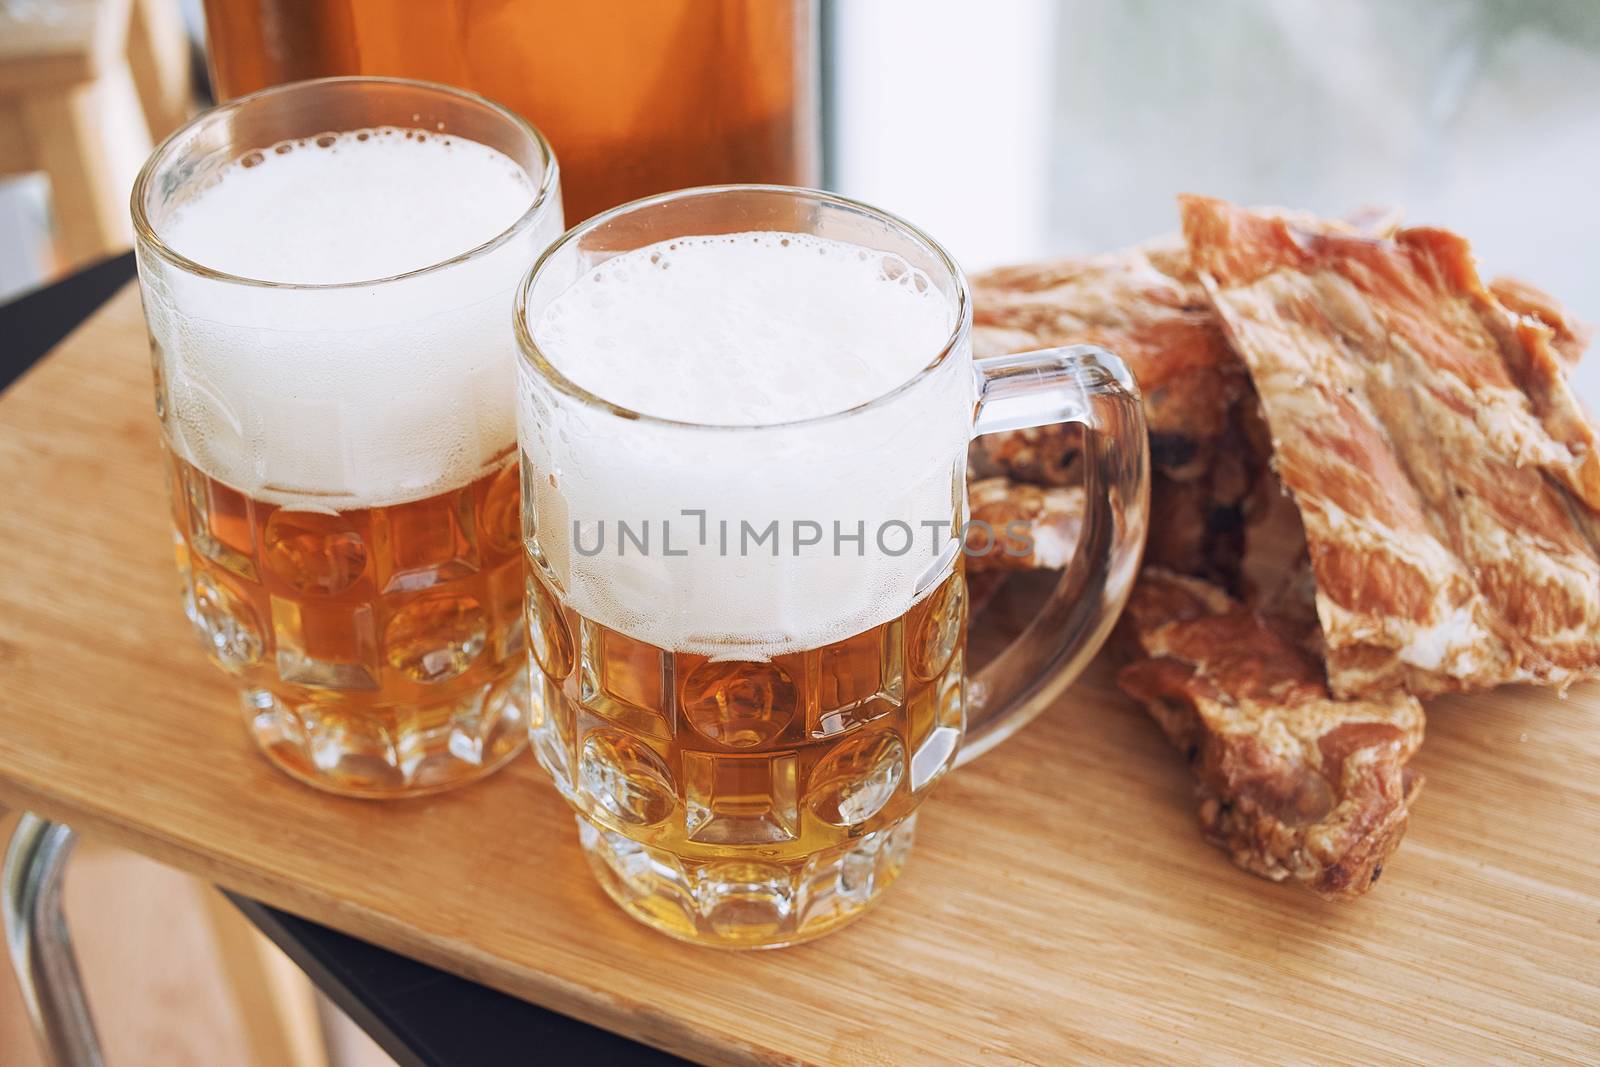 Smoked ribs and beer by 3KStudio